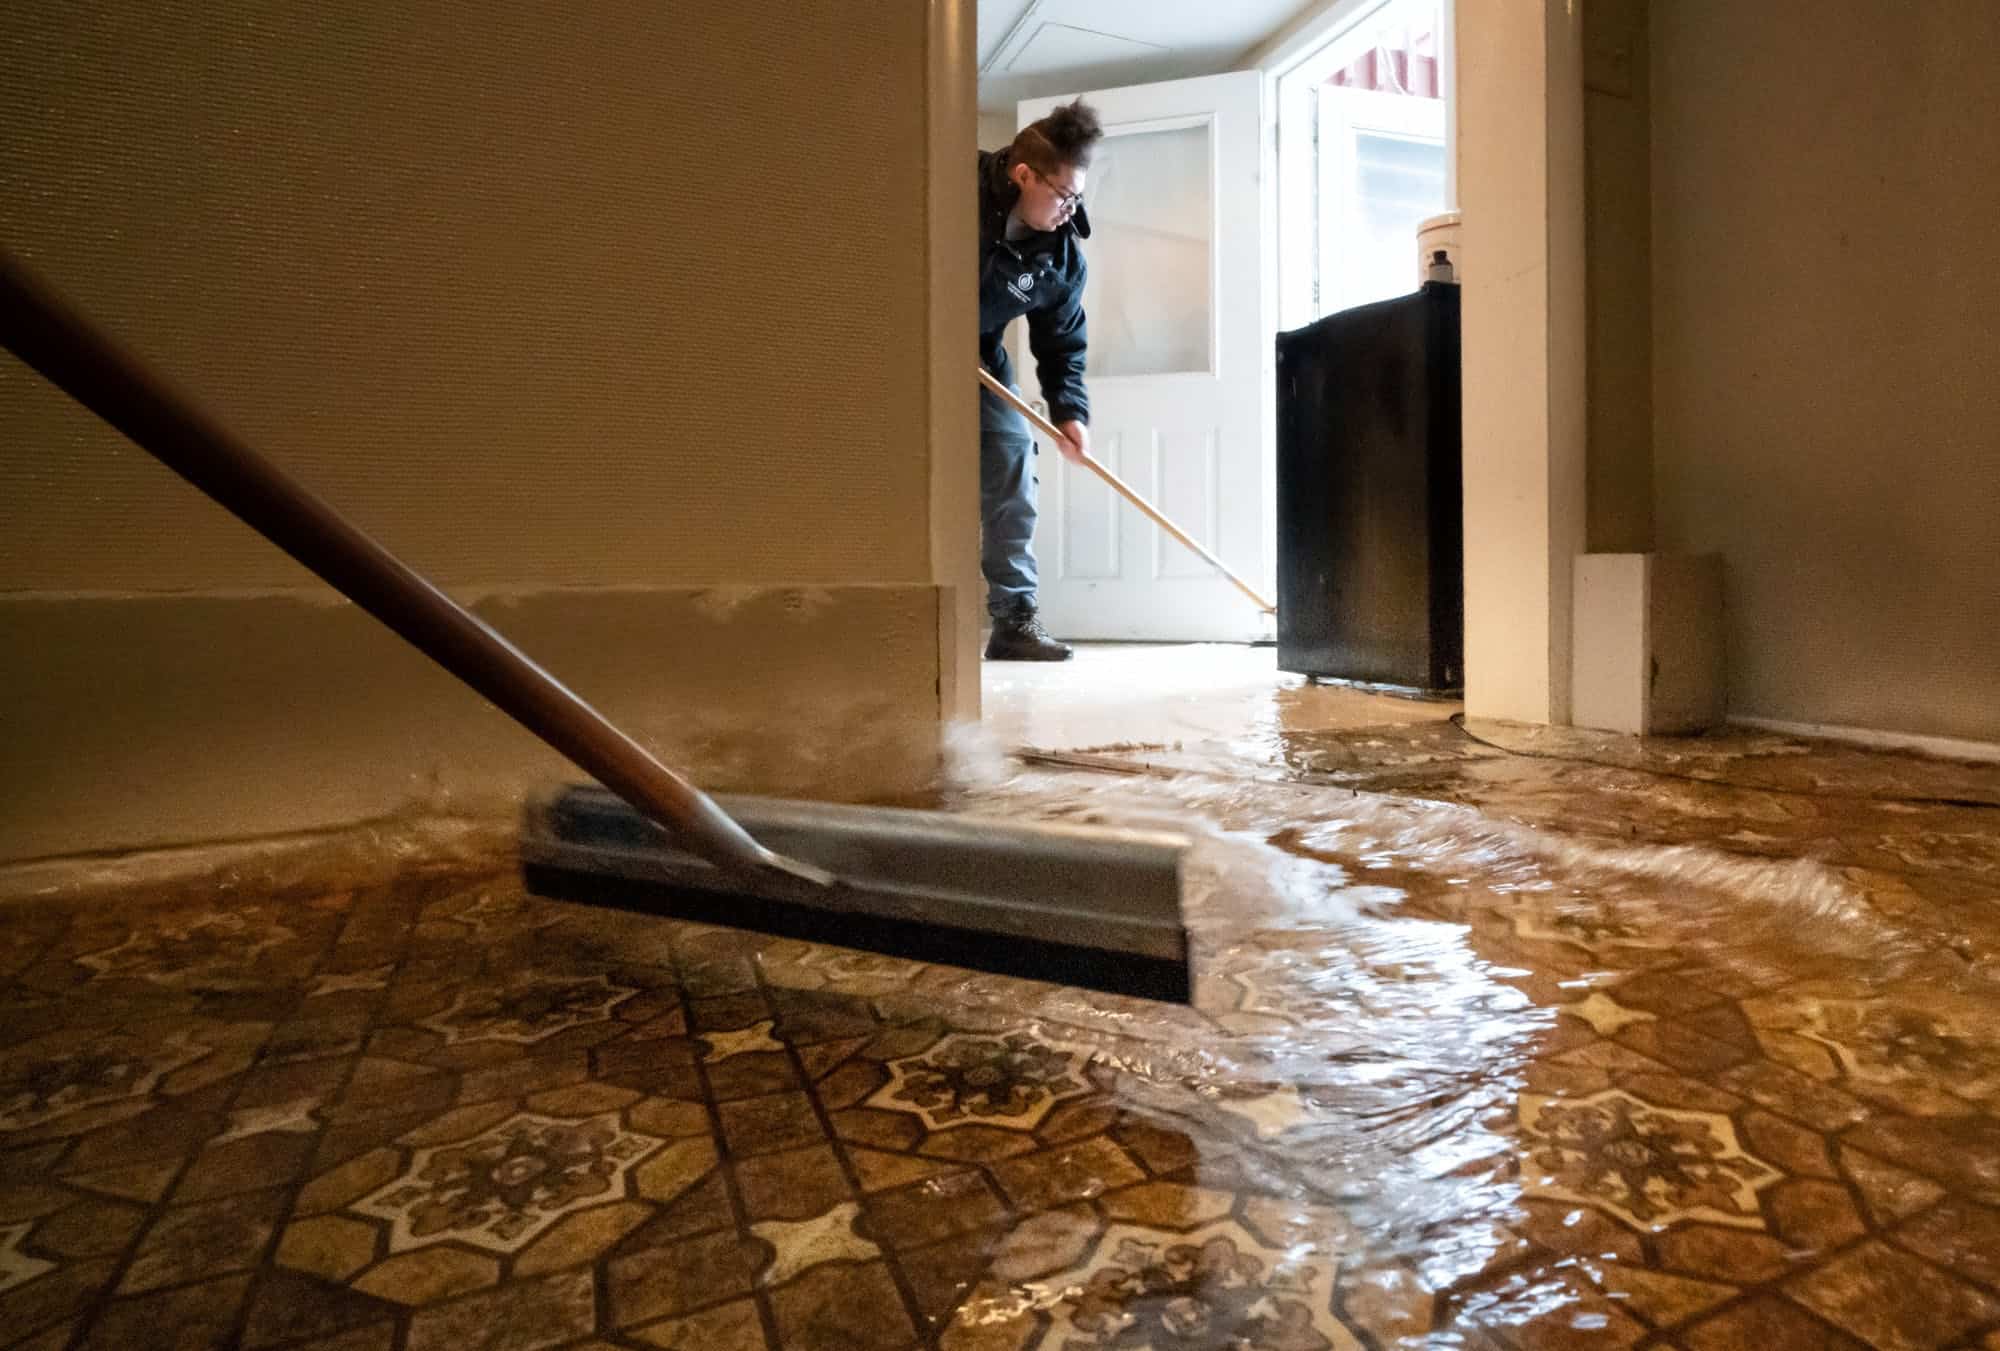 Minneapolis Water Damage, Flood Removal Service Minneapolis, Water Damage Restoration Minneapolis, Water Damage Minneapolis, Flood Water Removal Services Minneapolis, Raw Sewage Cleanup Minneapolis, Sewage Removal Services Minneapolis